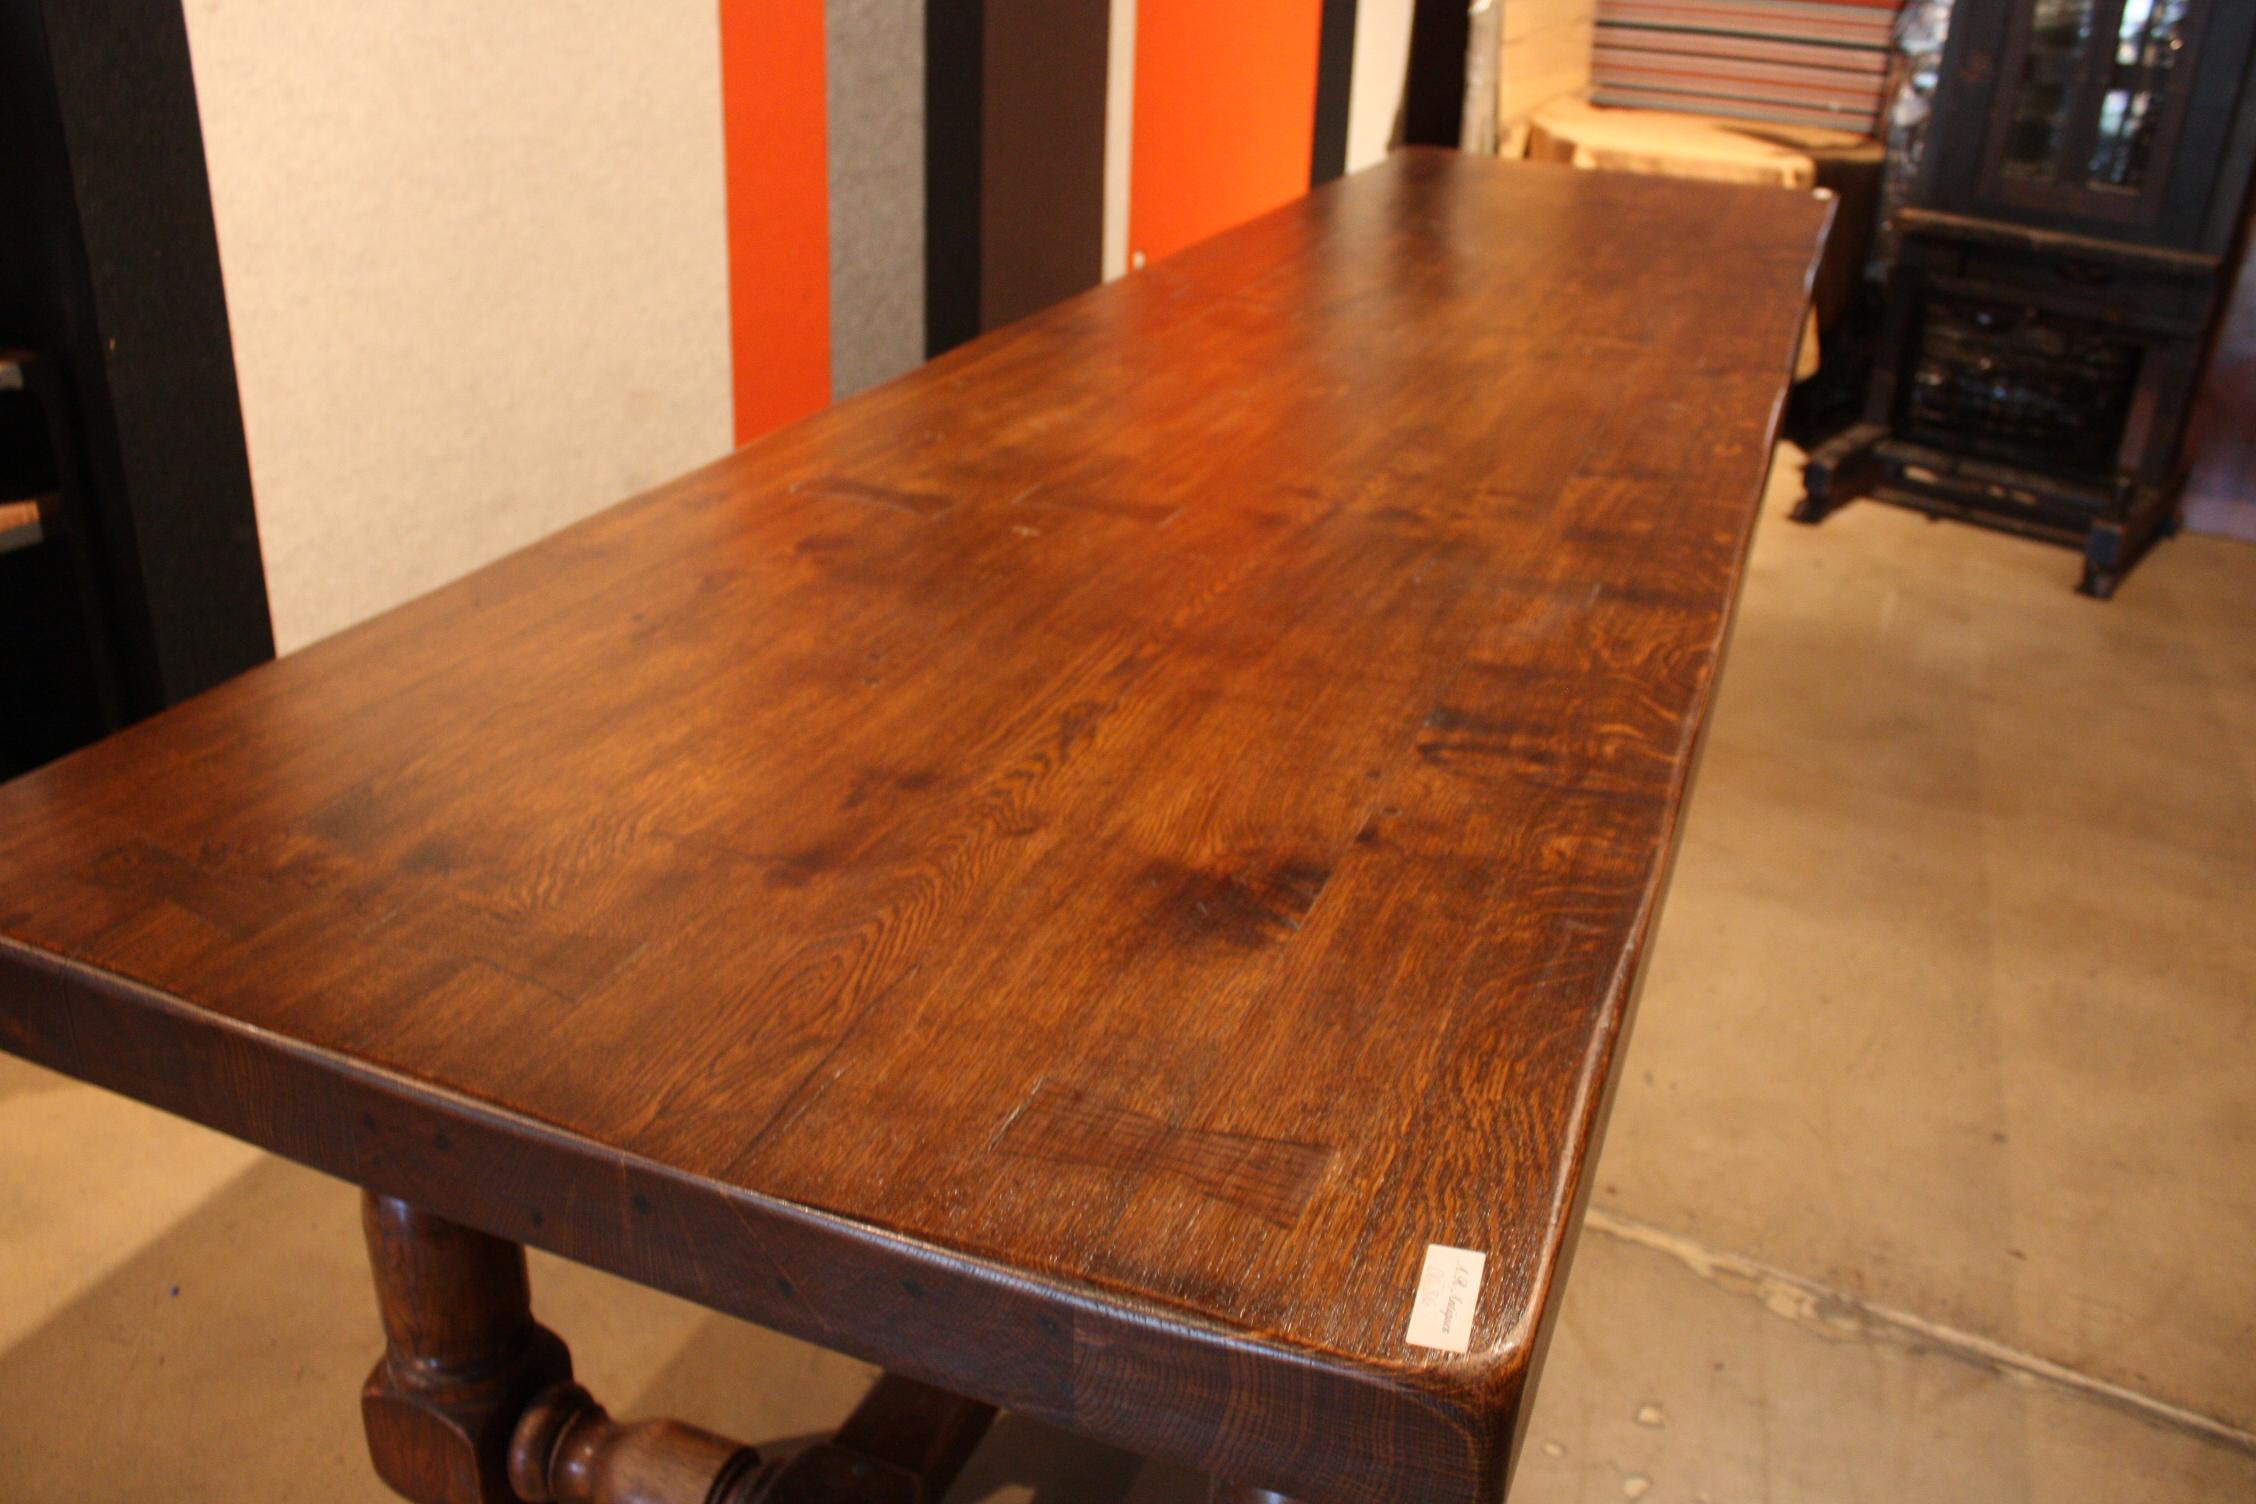 Oak Mid-20th Century French Dining Room Table